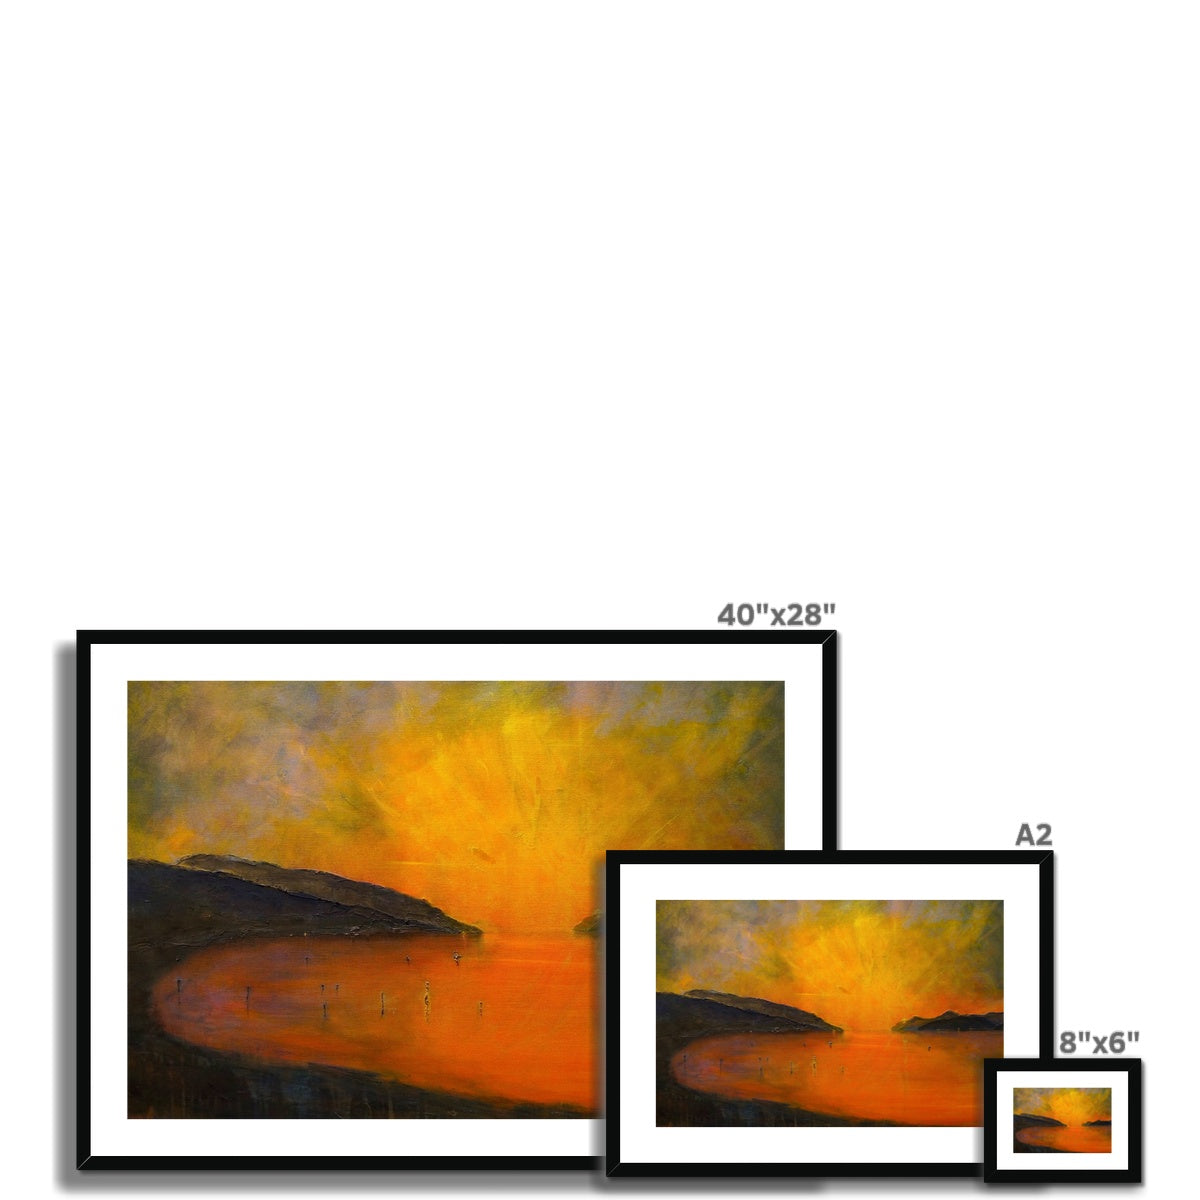 Loch Ness Sunset Painting | Framed & Mounted Prints From Scotland-Framed & Mounted Prints-Scottish Lochs & Mountains Art Gallery-Paintings, Prints, Homeware, Art Gifts From Scotland By Scottish Artist Kevin Hunter